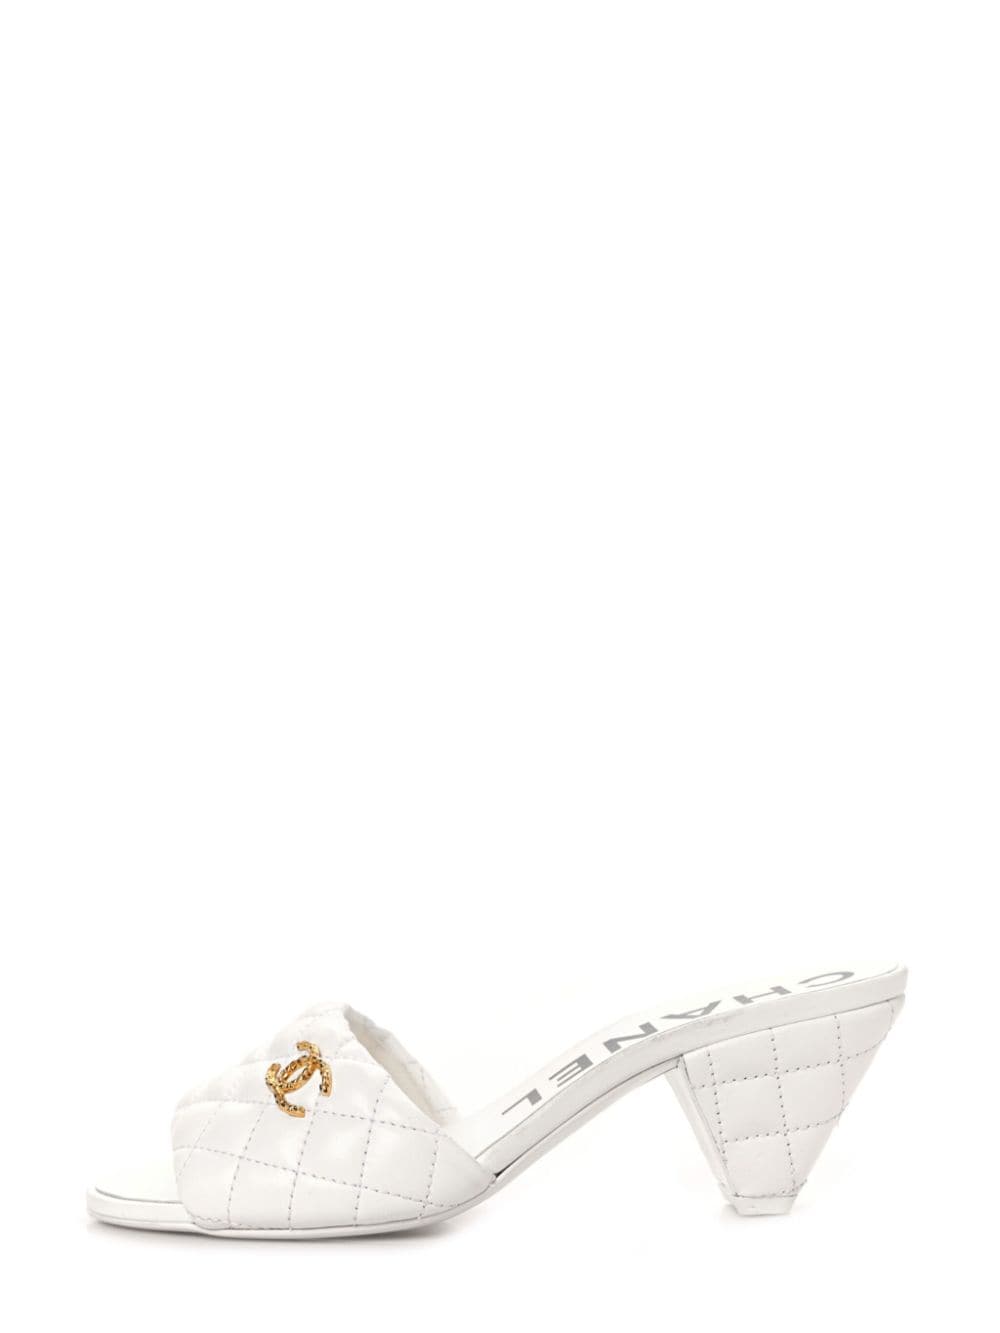 CHANEL Pre-Owned CC diamond-quilted sandals - White